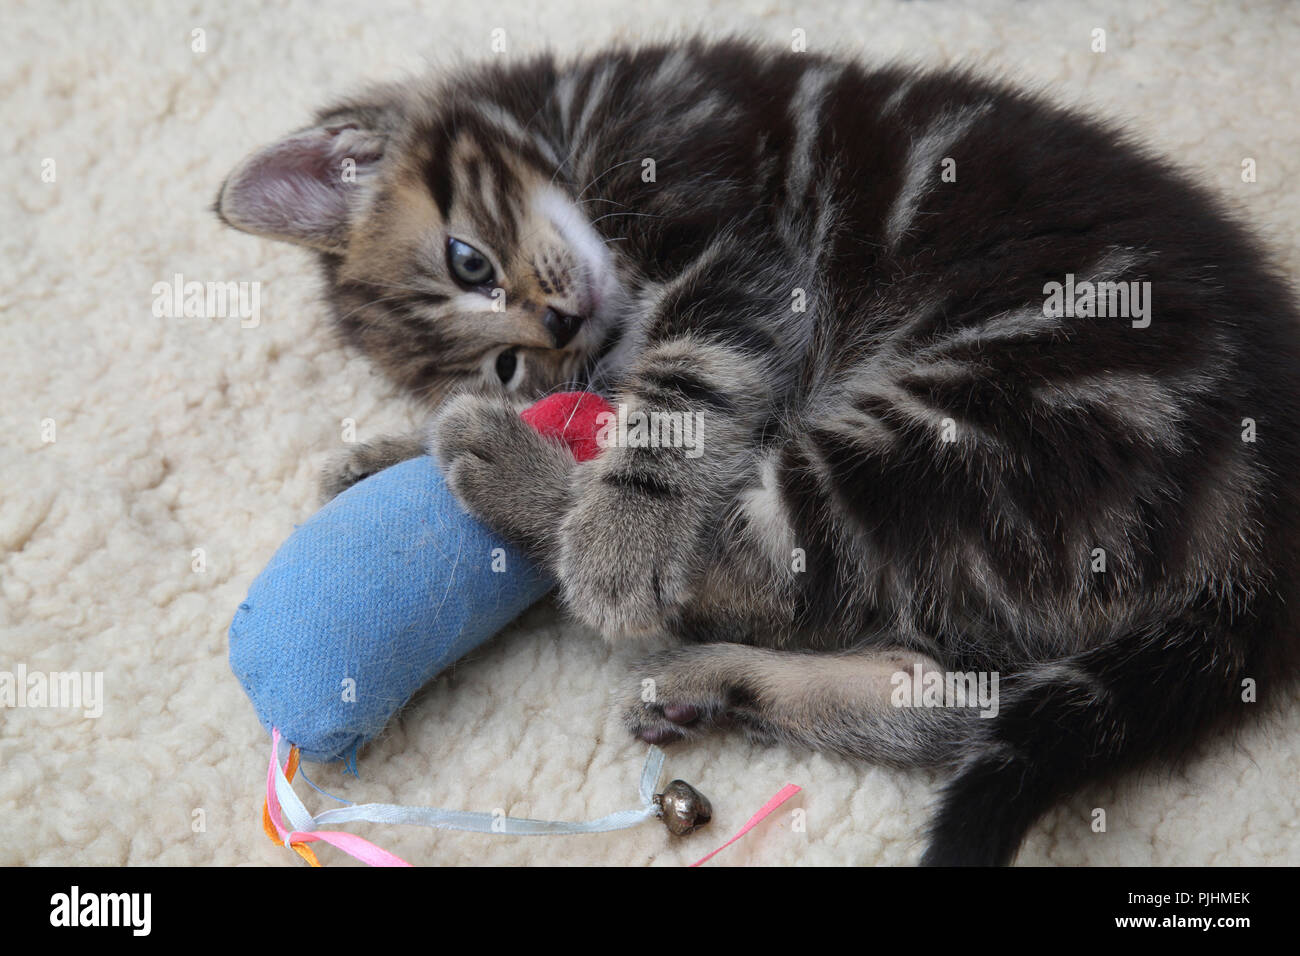 Sept semaines Tabby Kitten Playing with Toy Mouse Banque D'Images